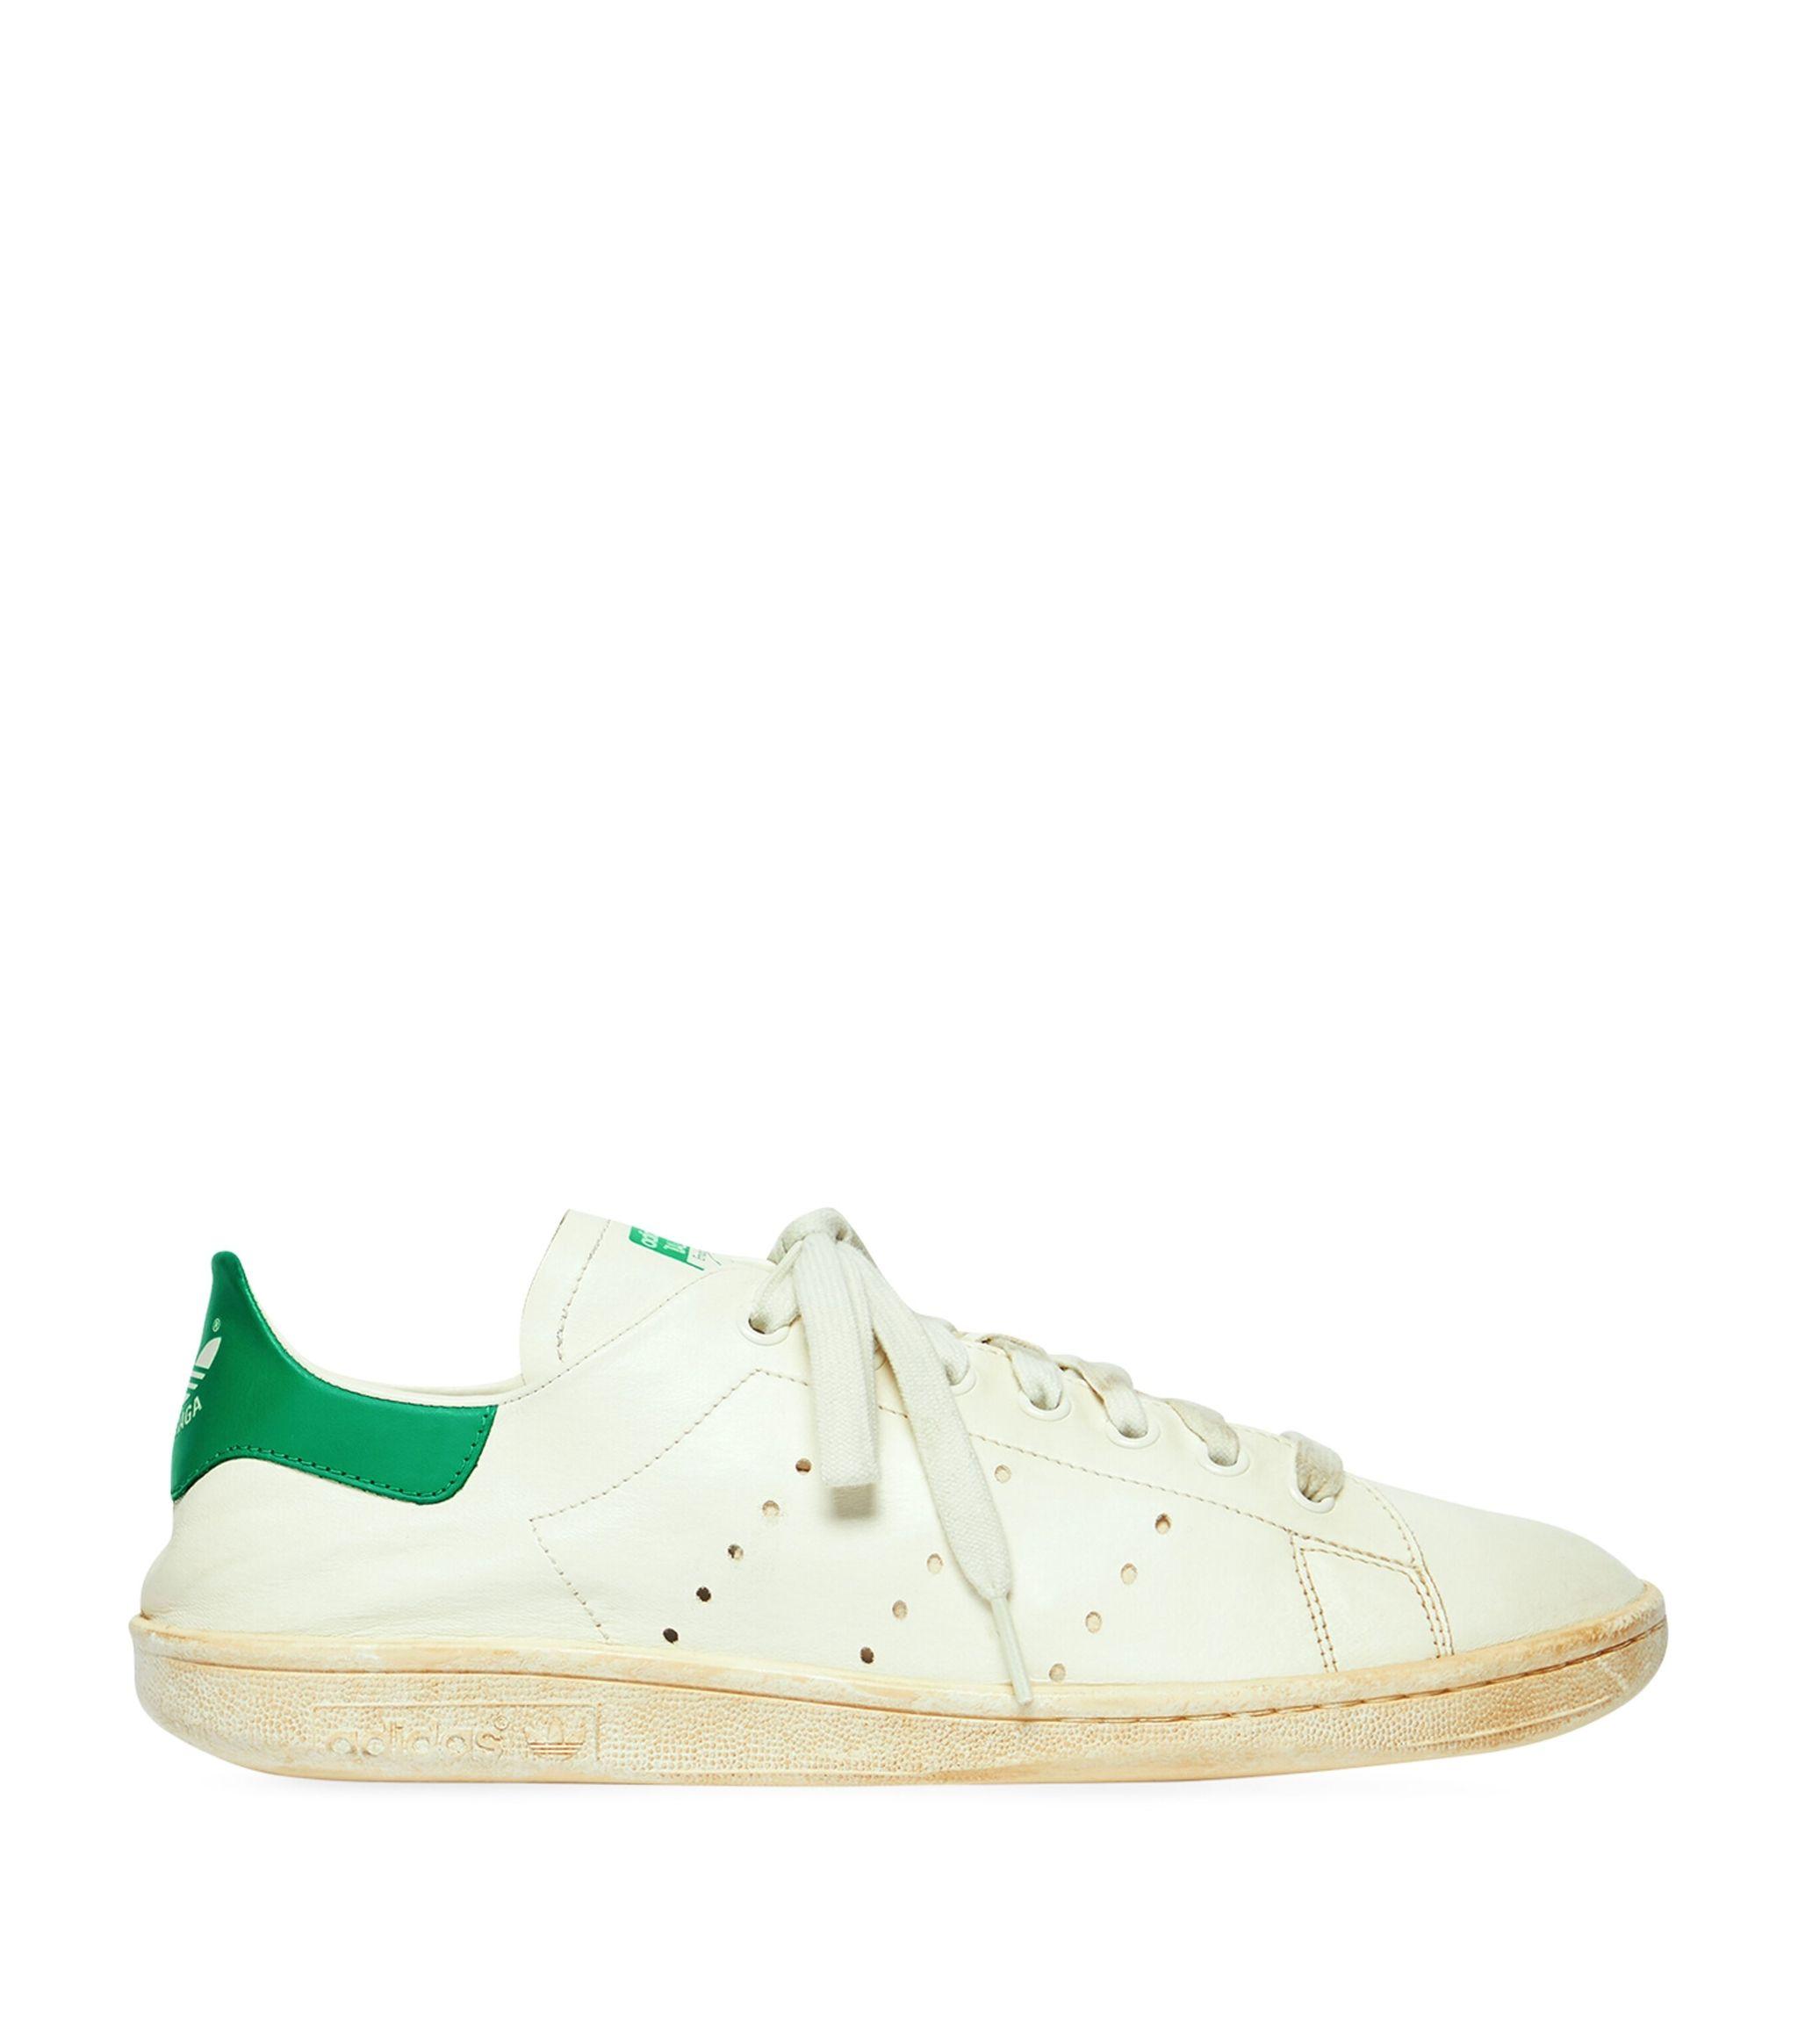 Balenciaga X Adidas Worn-out Stan Smith Sneakers in Green | Lyst